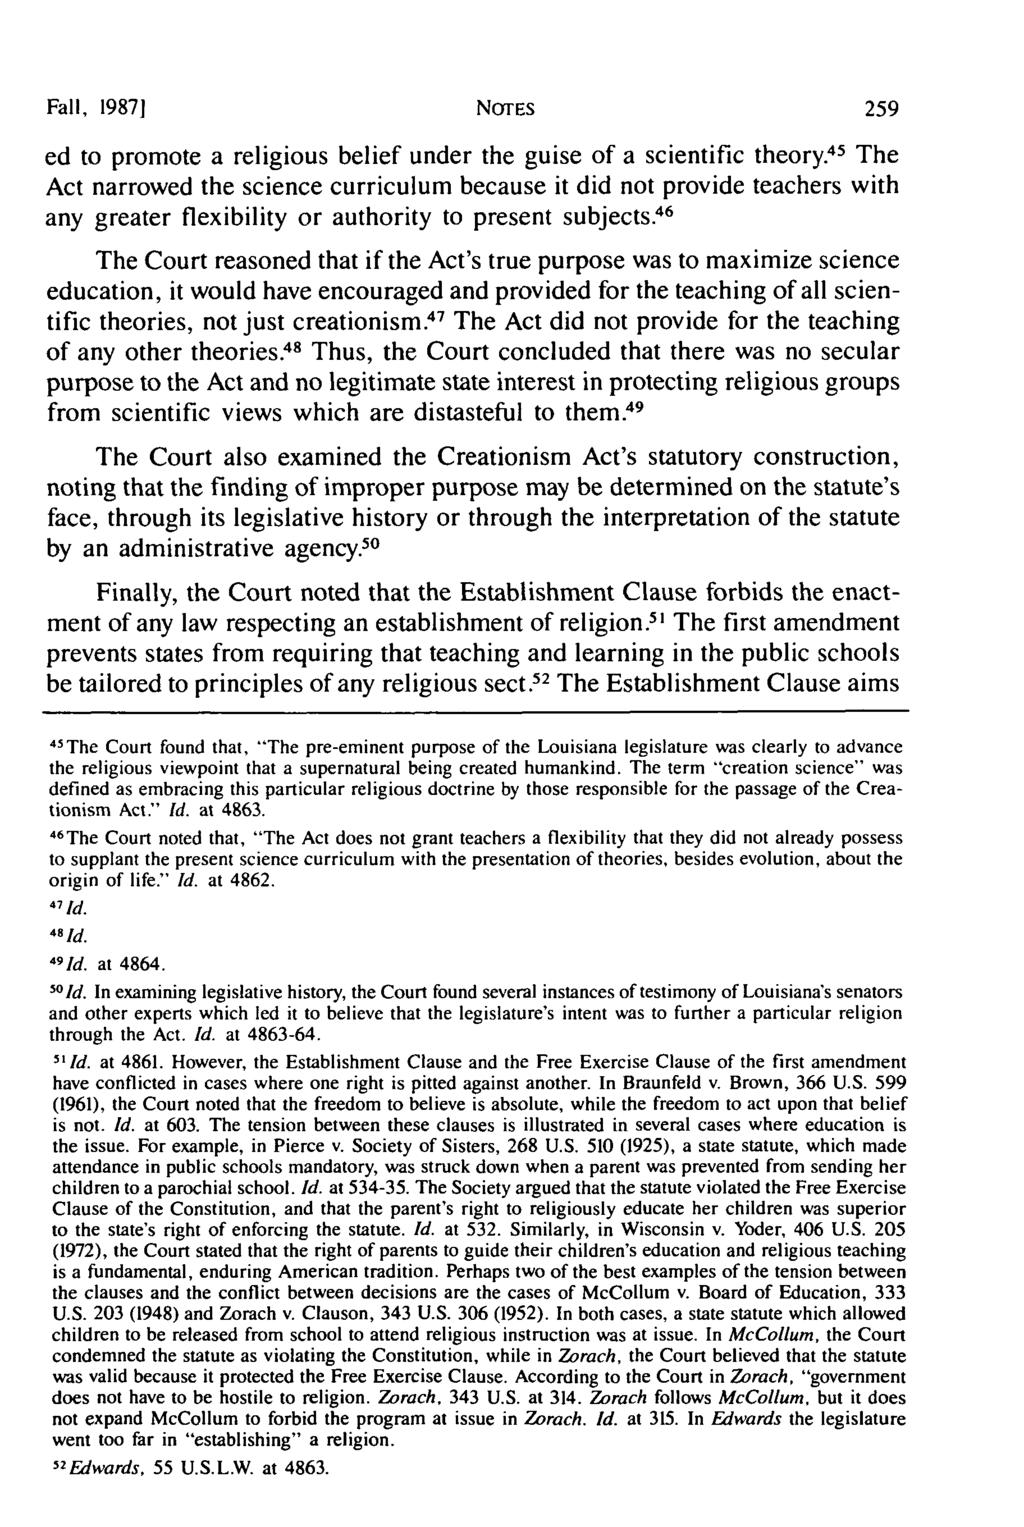 Moore: The End of Creationism in Our Public Schools? Fall, 19871 NOTrES ed to promote a religious belief under the guise of a scientific theory.